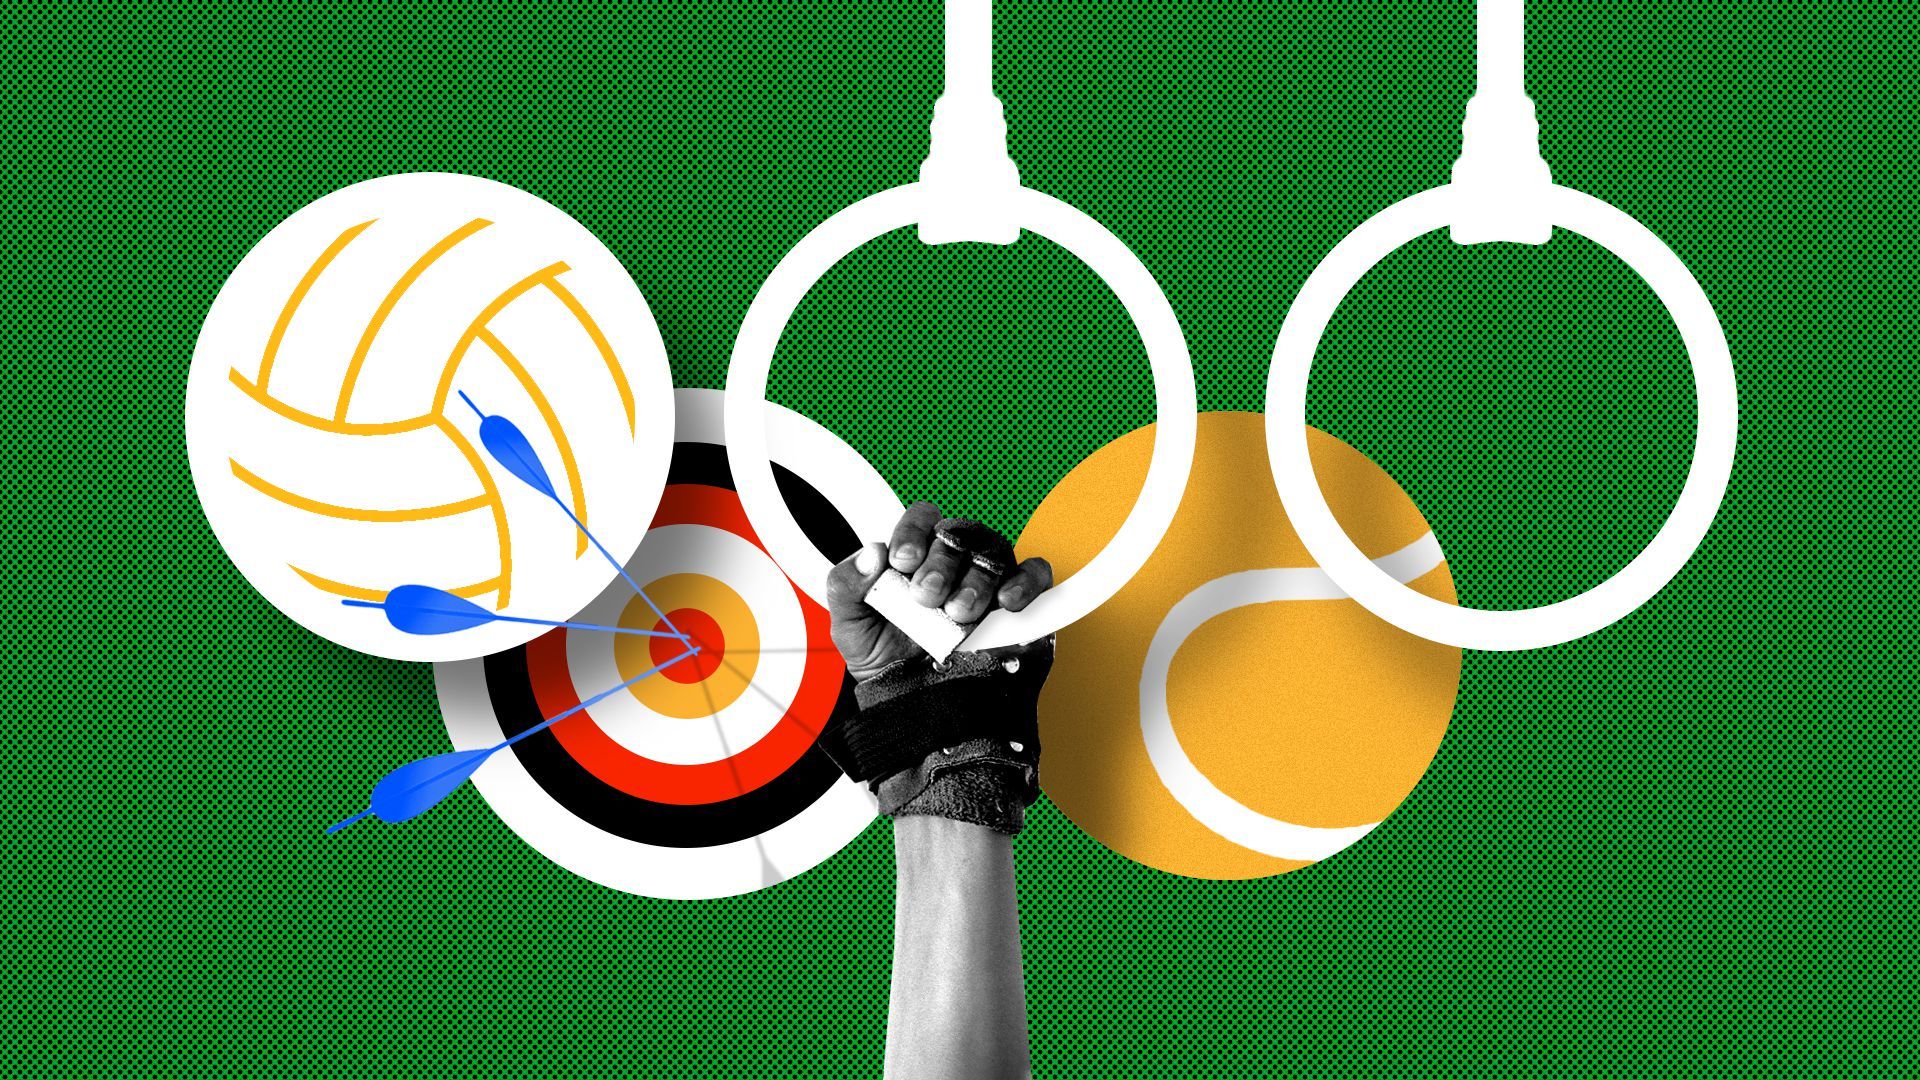 Illustration of various sports references such as a target, volleyball, and tennis ball, in the shape of the olympic rings